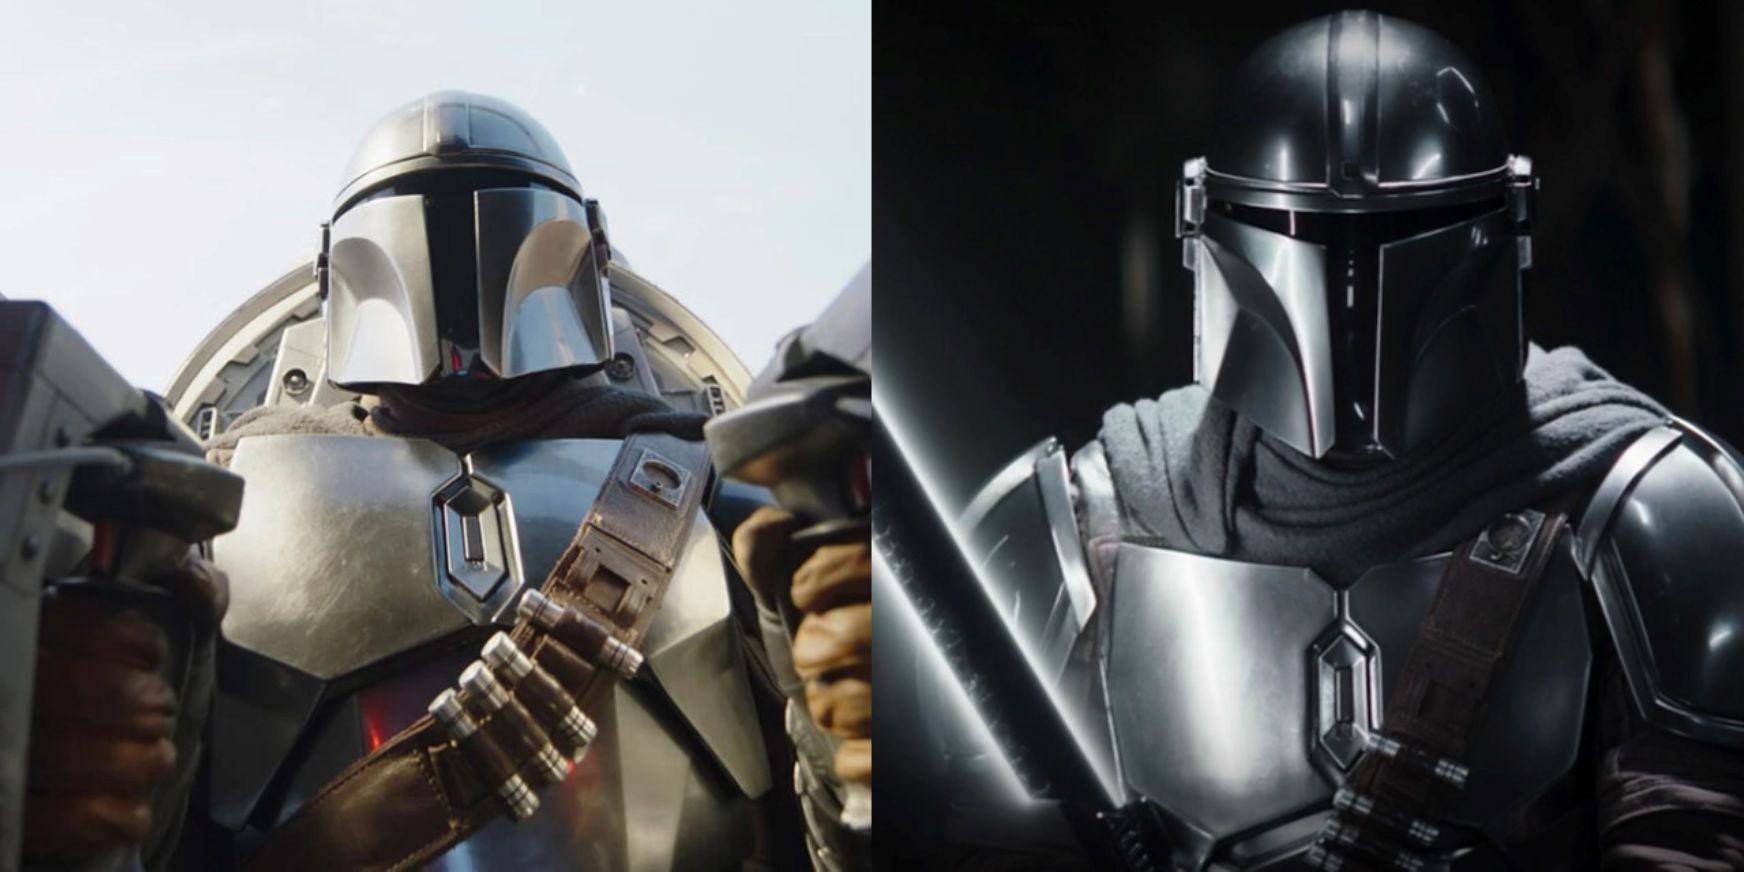 Split image of the Mandalorian flying his starfighter and wielding the Darksaber in The Book of Boba Fett